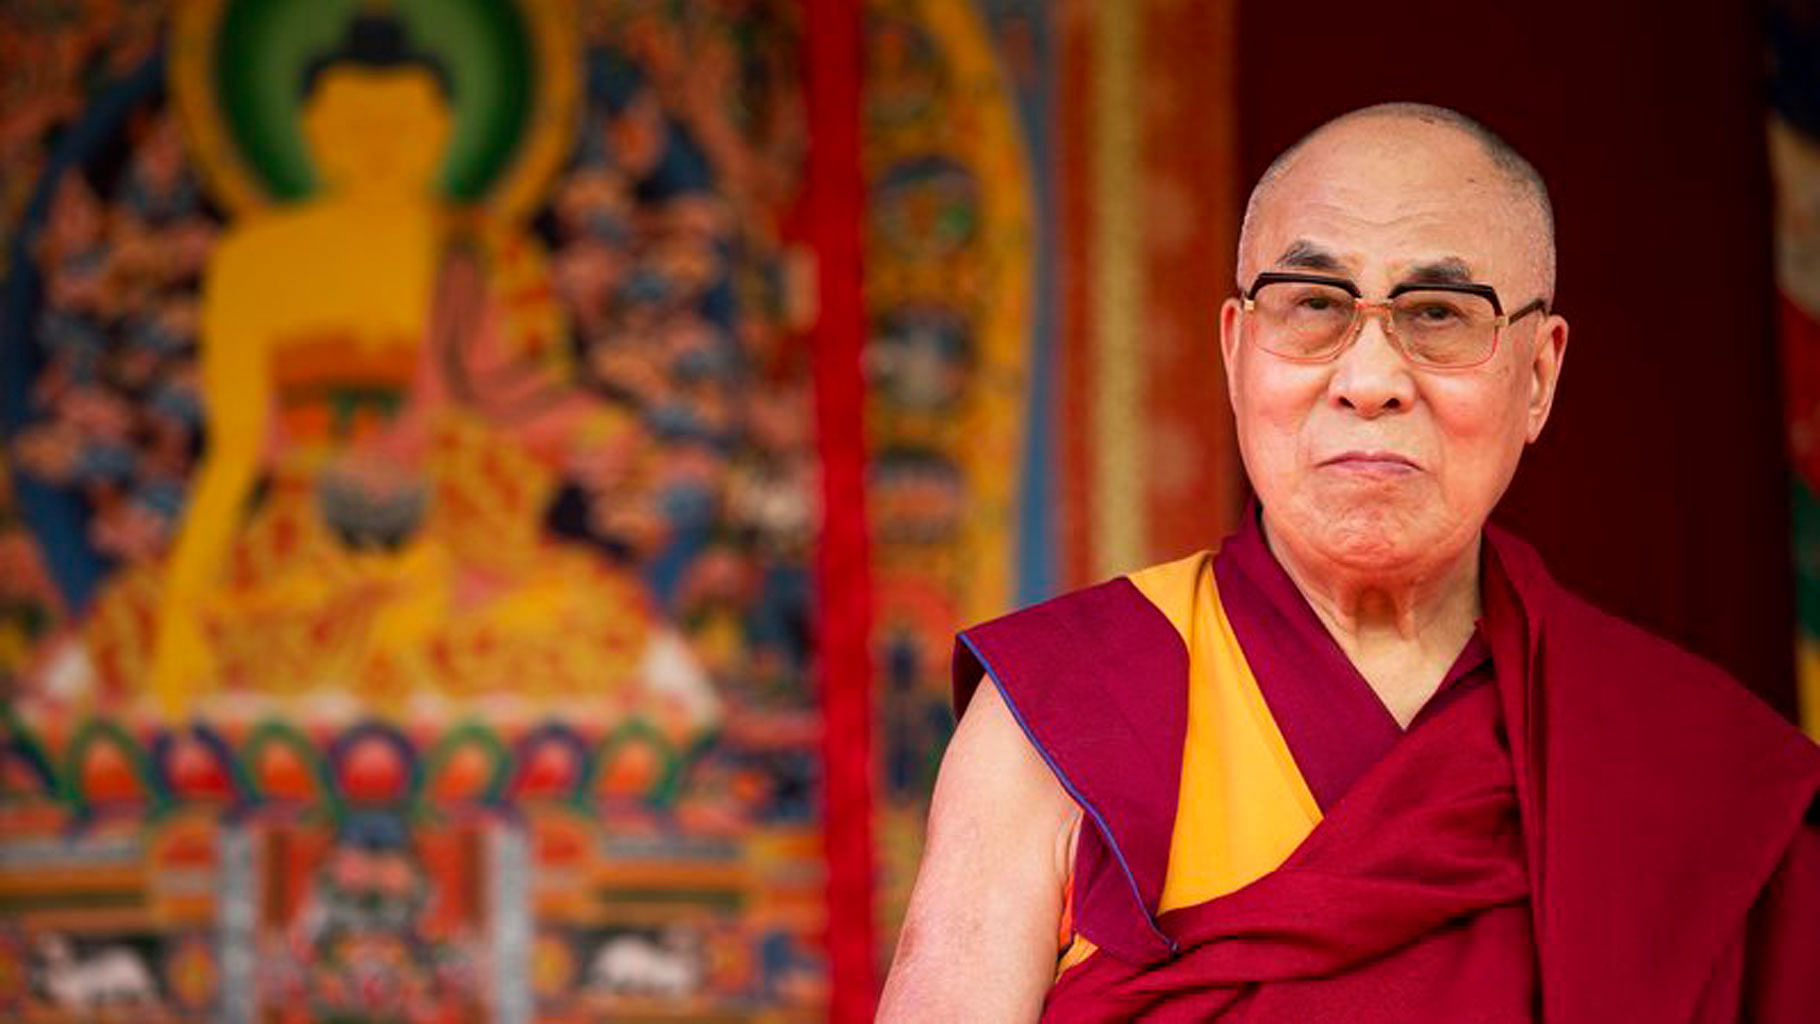 

The Dalai Lama before making a speech in southern England on 29 June, 2015. (Photo: AP)